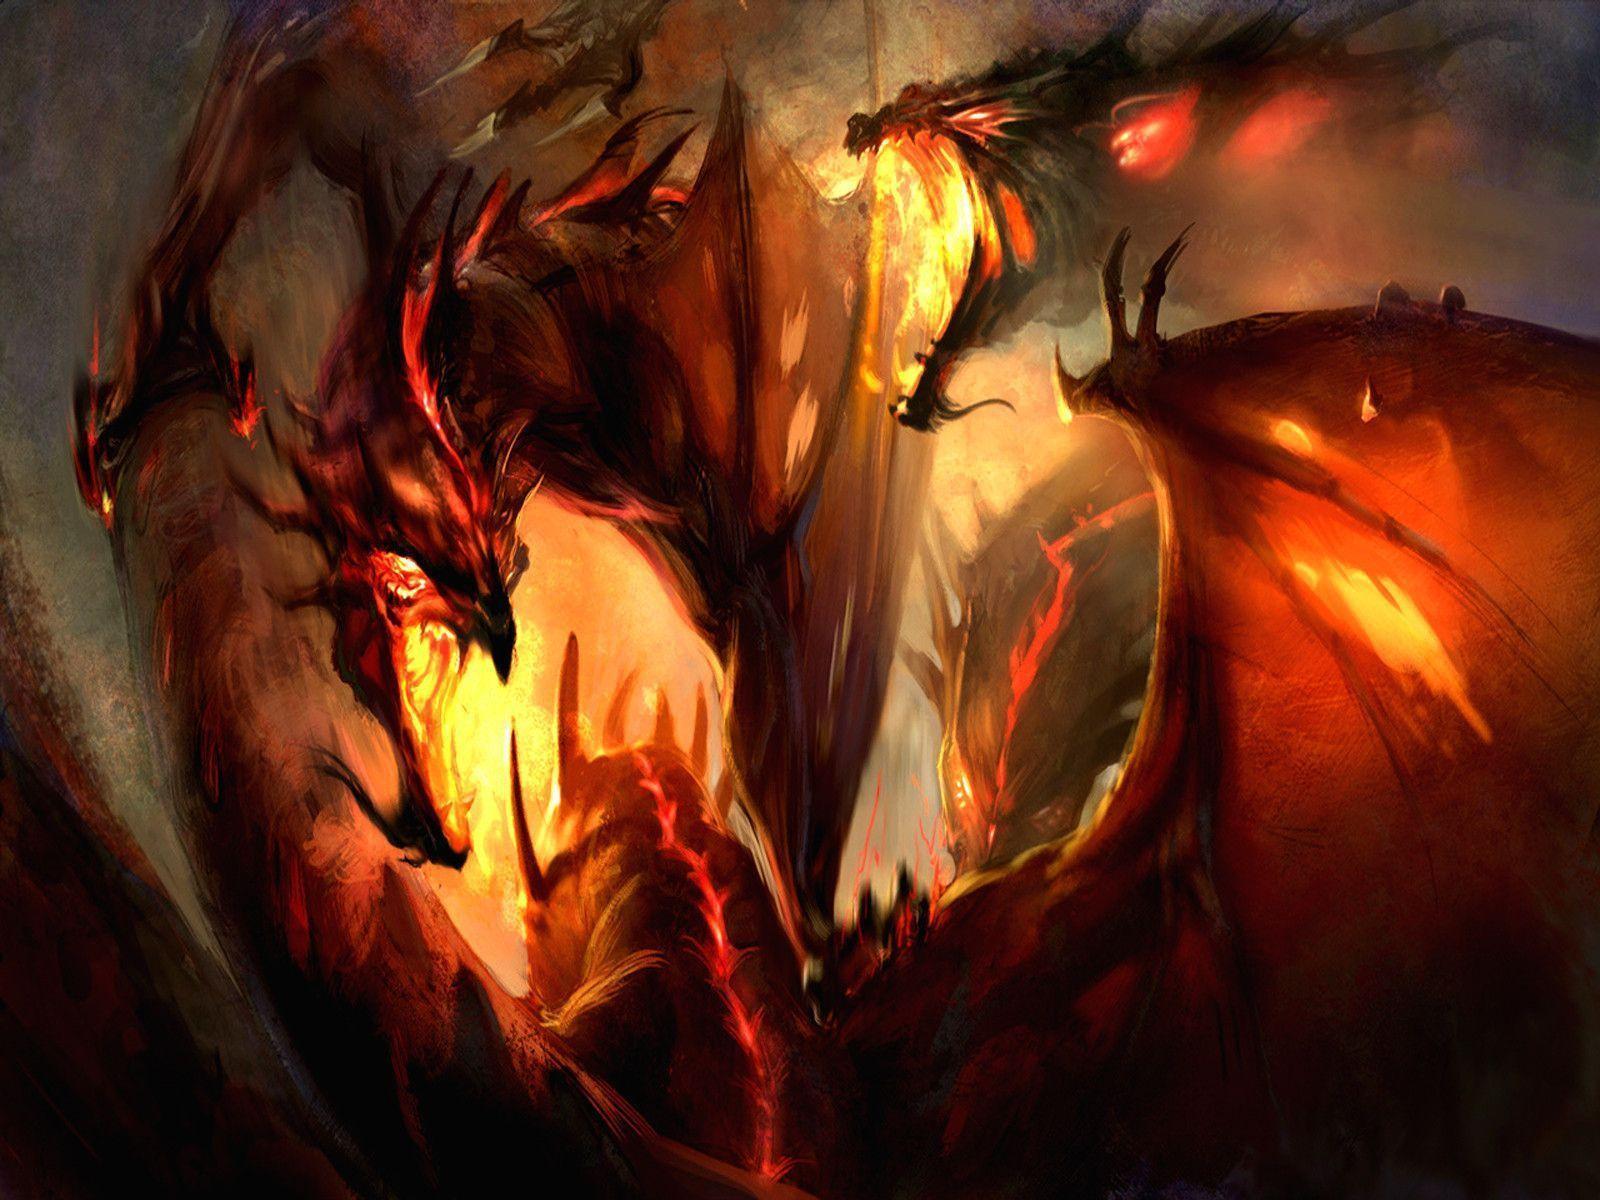 Dragons Download Free Wallpaper, Image & Picture. Download HD